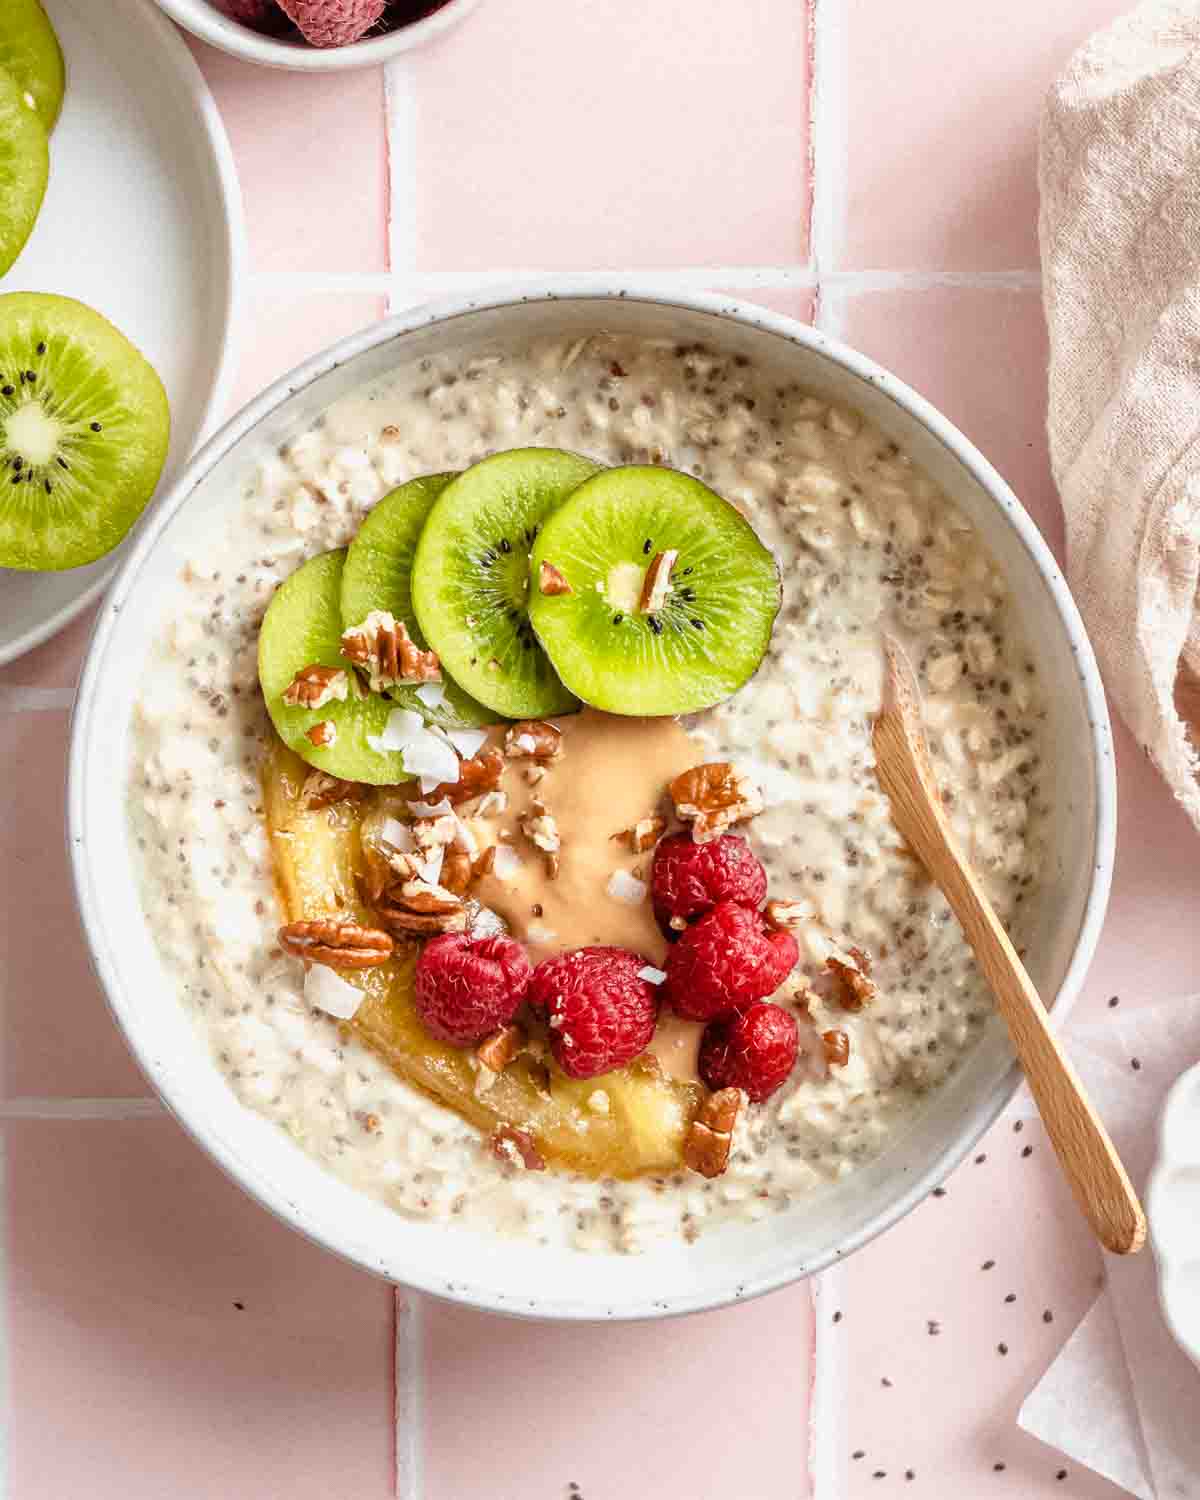 overnight oats in a bowl topped with kiwi, raspberries, caramelized banana and peanut butter., homemade granola and coconut flakes.